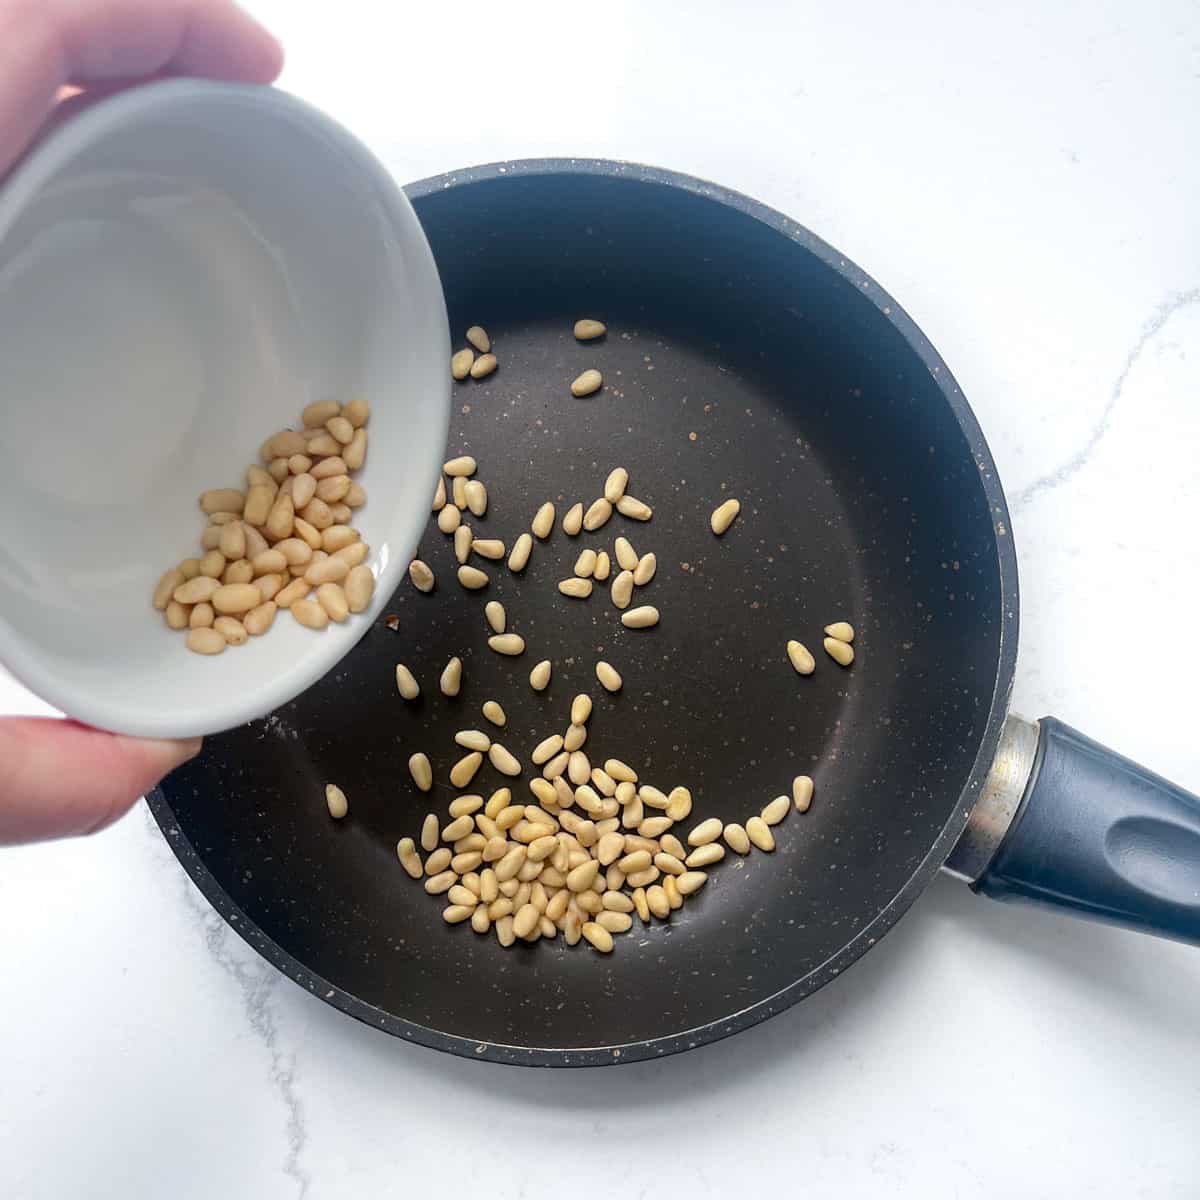 Adding pine nuts to a frying pan for roasting.